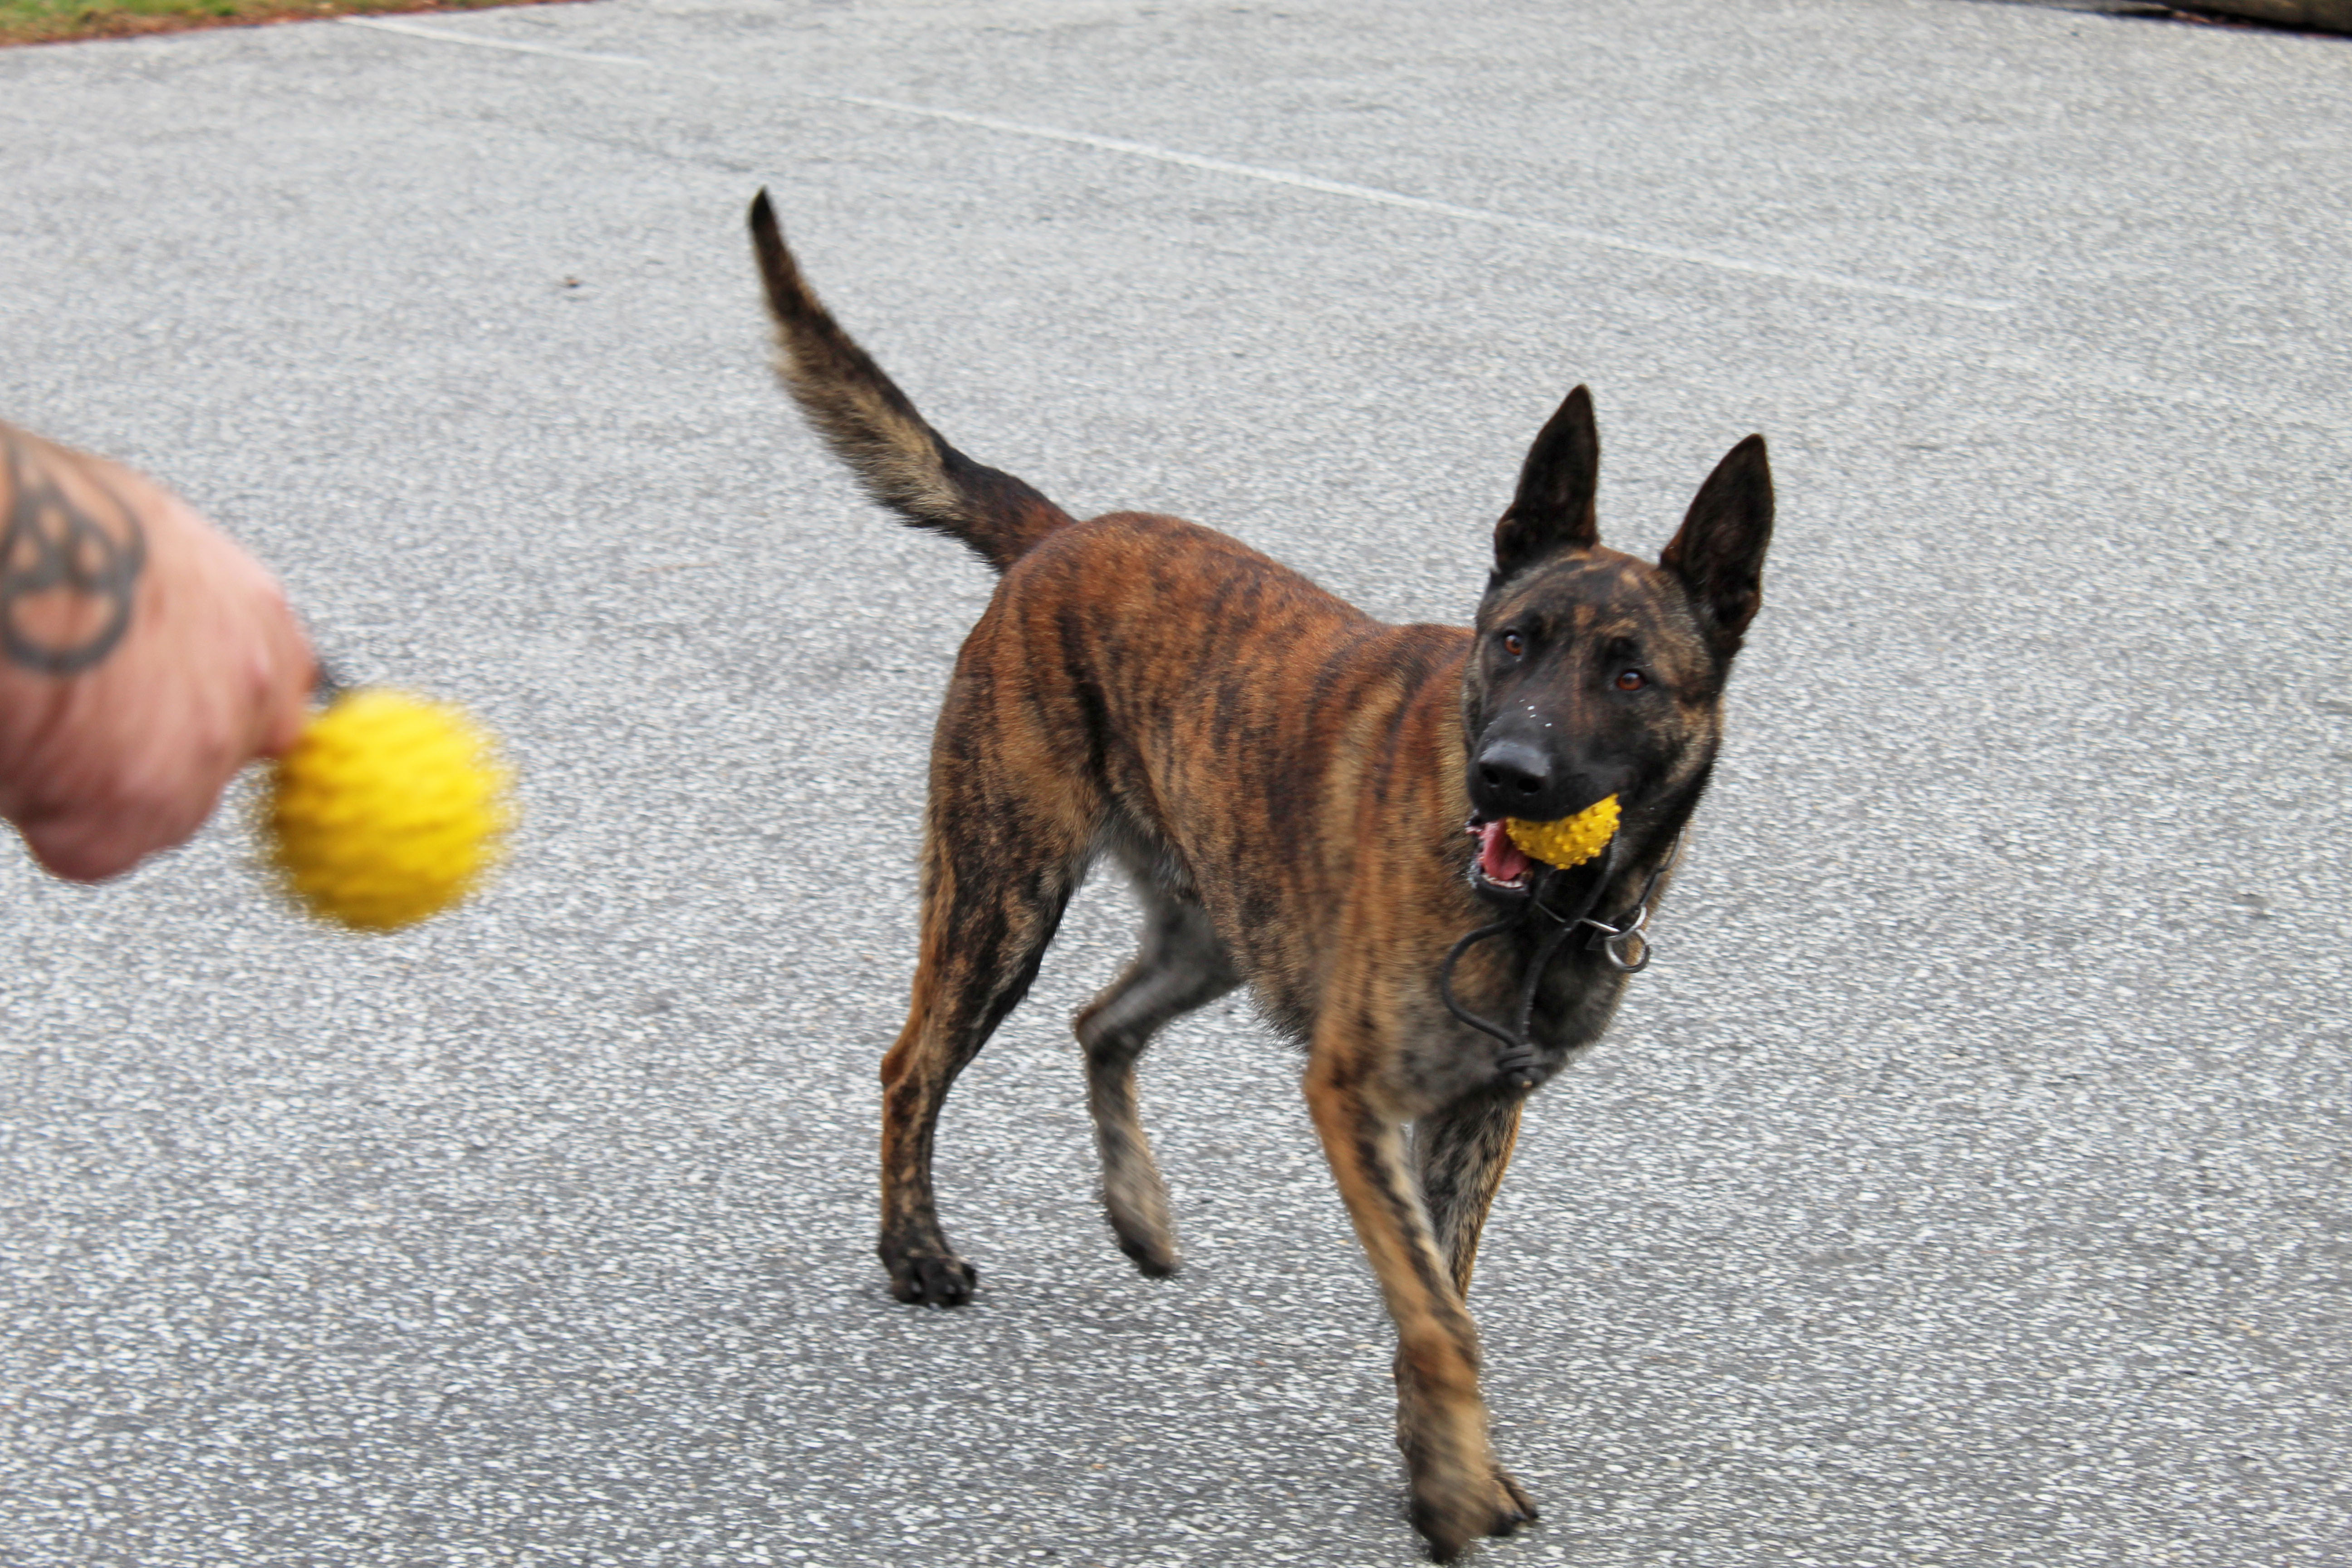 Kivo watches his handler Jesse English carefully as toys are on the line. Kivo has been the Mitchell County Sheriff’s Department K-9 Unit dog for several months but as he settles in, taking time to play once in a while is an important part of his life. (MNJ photo/Juliana Walker)